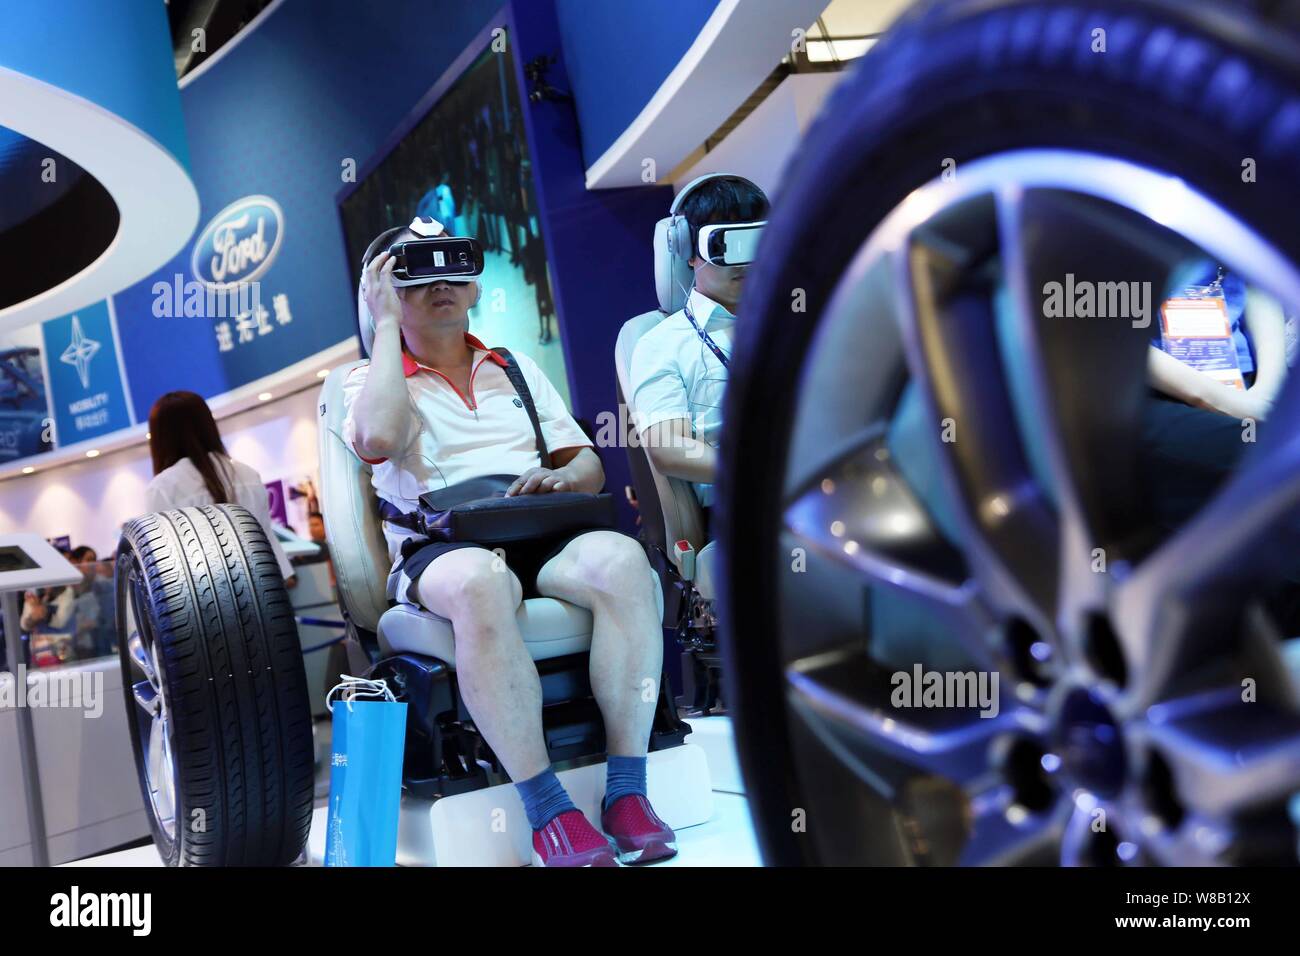 A visitor tries out a VR (Virtual Reality) device of Ford Smart Mobility during the 2016 Mobile World Congress (MWC) in Shanghai, China, 29 June 2016. Stock Photo